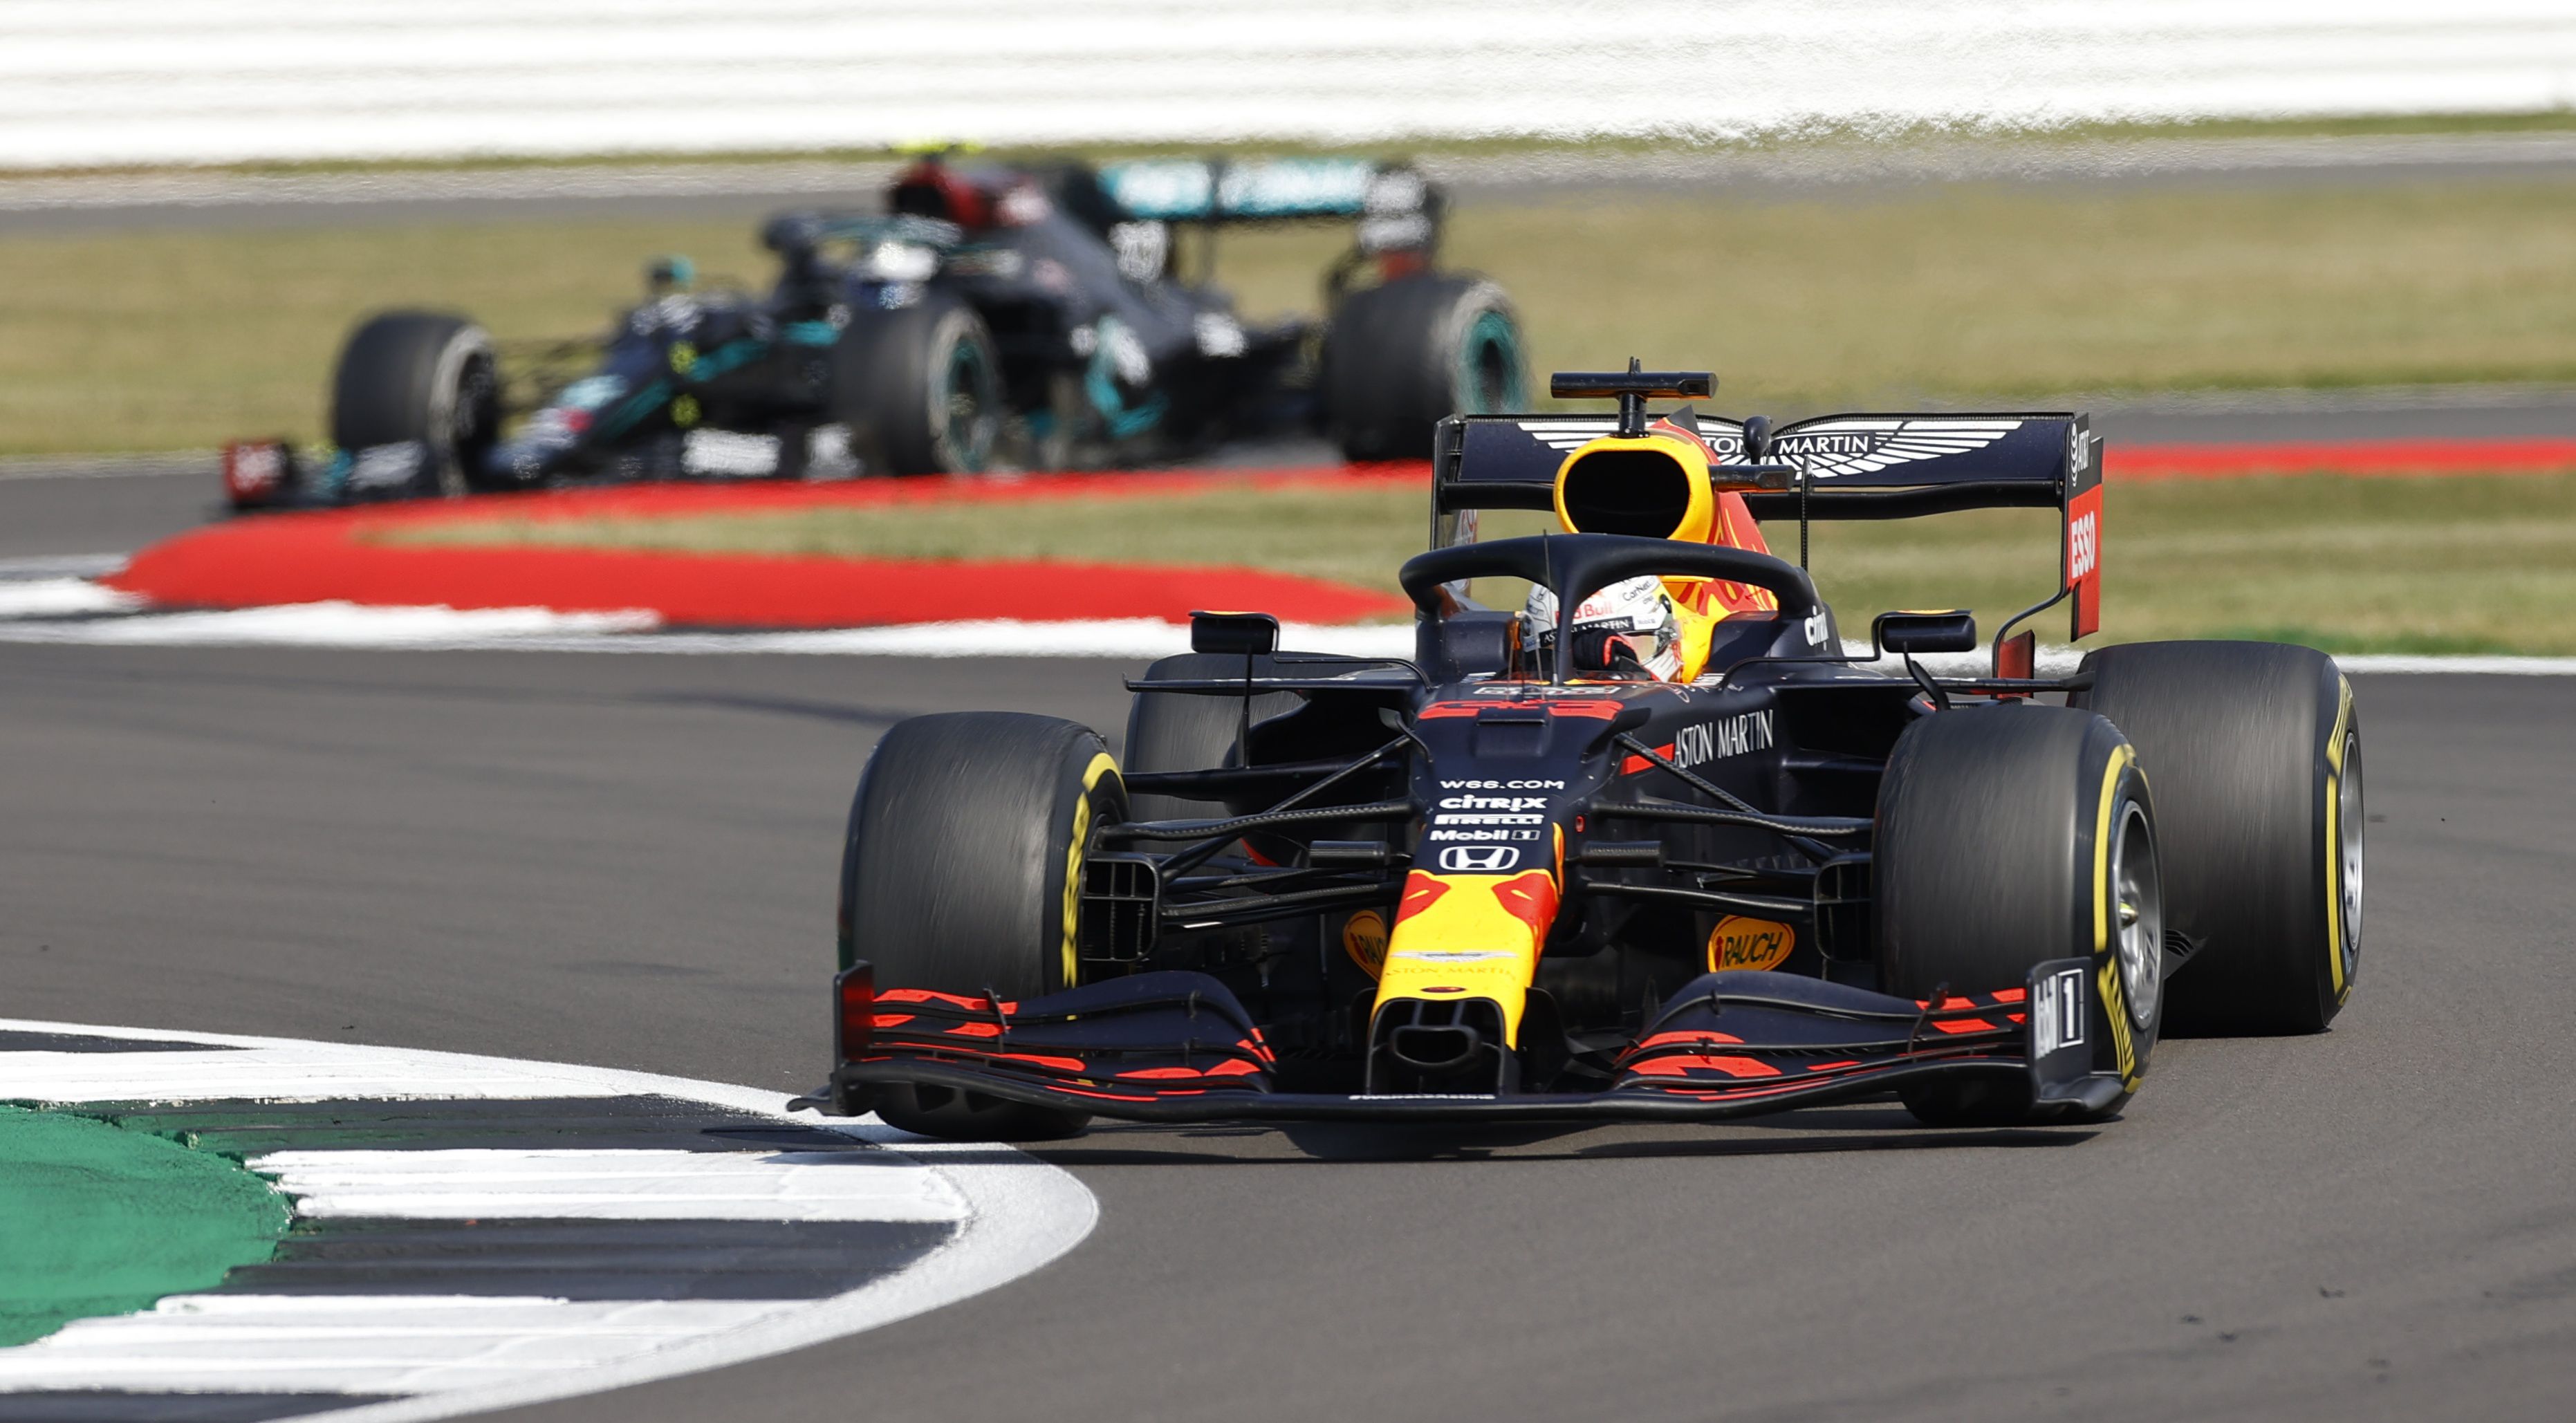 Formula One F1 - 70th Anniversary Grand Prix - Silverstone Circuit, Silverstone, Britain - August 9, 2020 Red Bull's Max Verstappen in action during the race Pool via REUTERS/Andrew Boyers